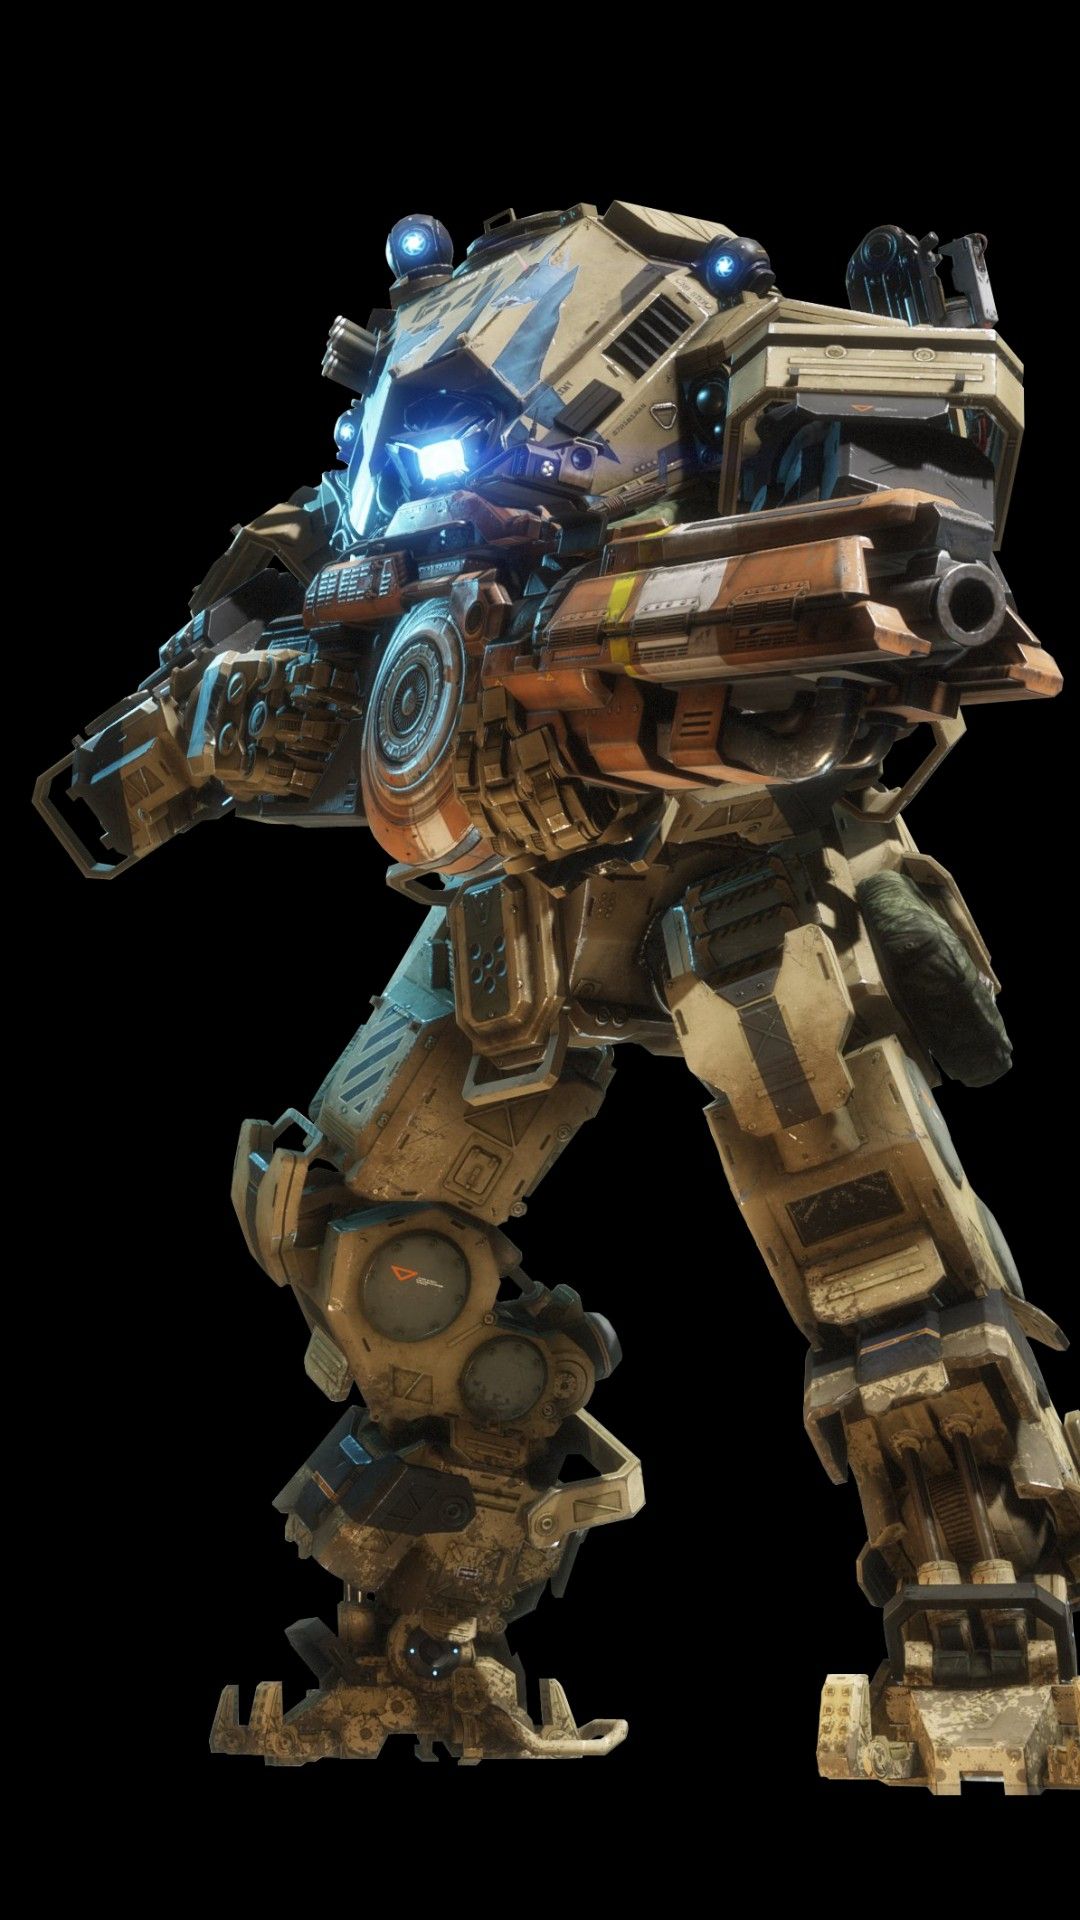 Wallpaper Ion, Titan, Titanfall 4K, Games,. Wallpaper for iPhone, Android, Mobile and Desktop